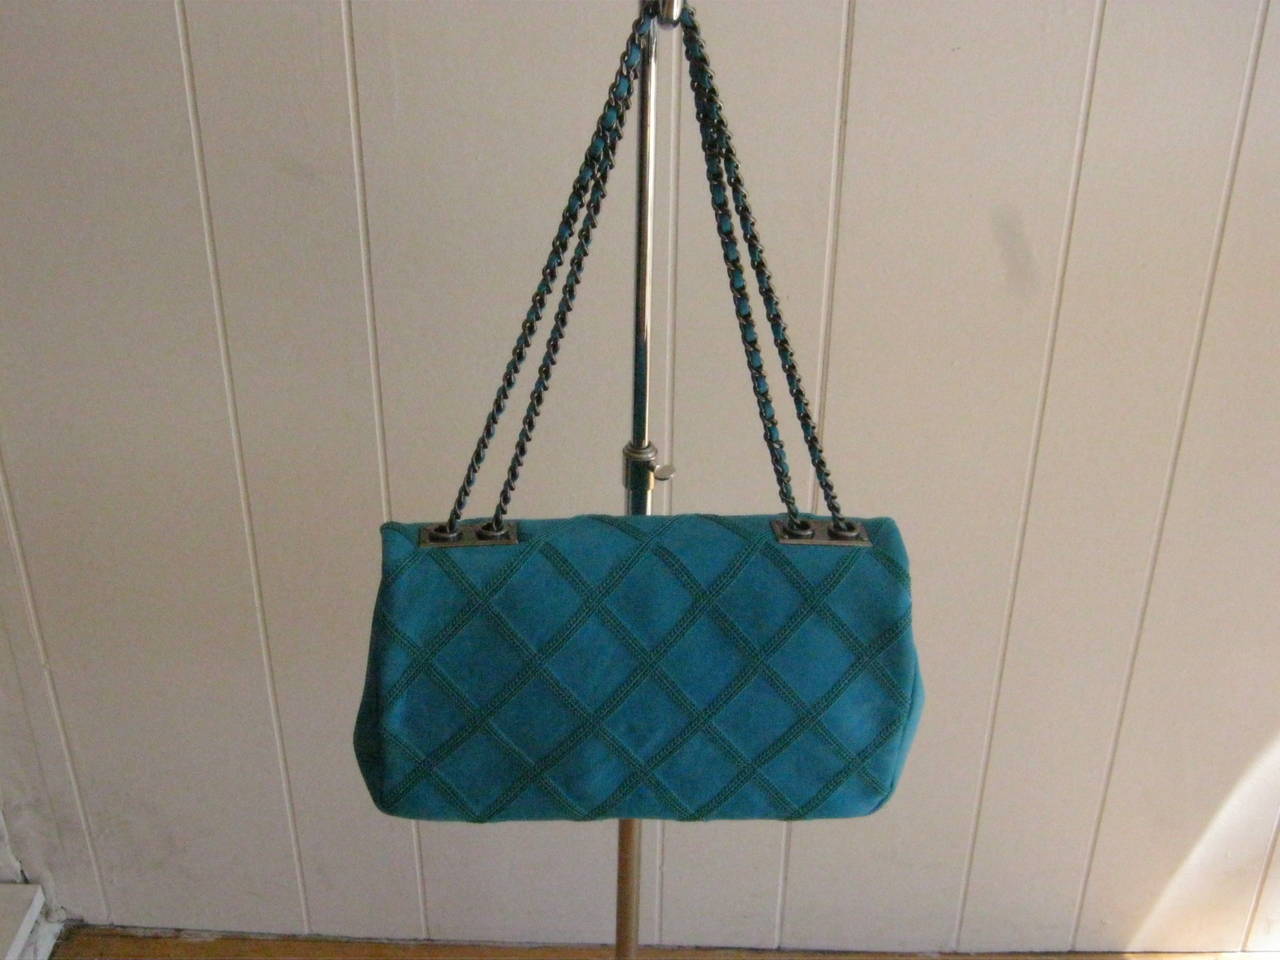 Women's Stunning CHANEL Turquoise Handbag with Signature Ribbed Quilting